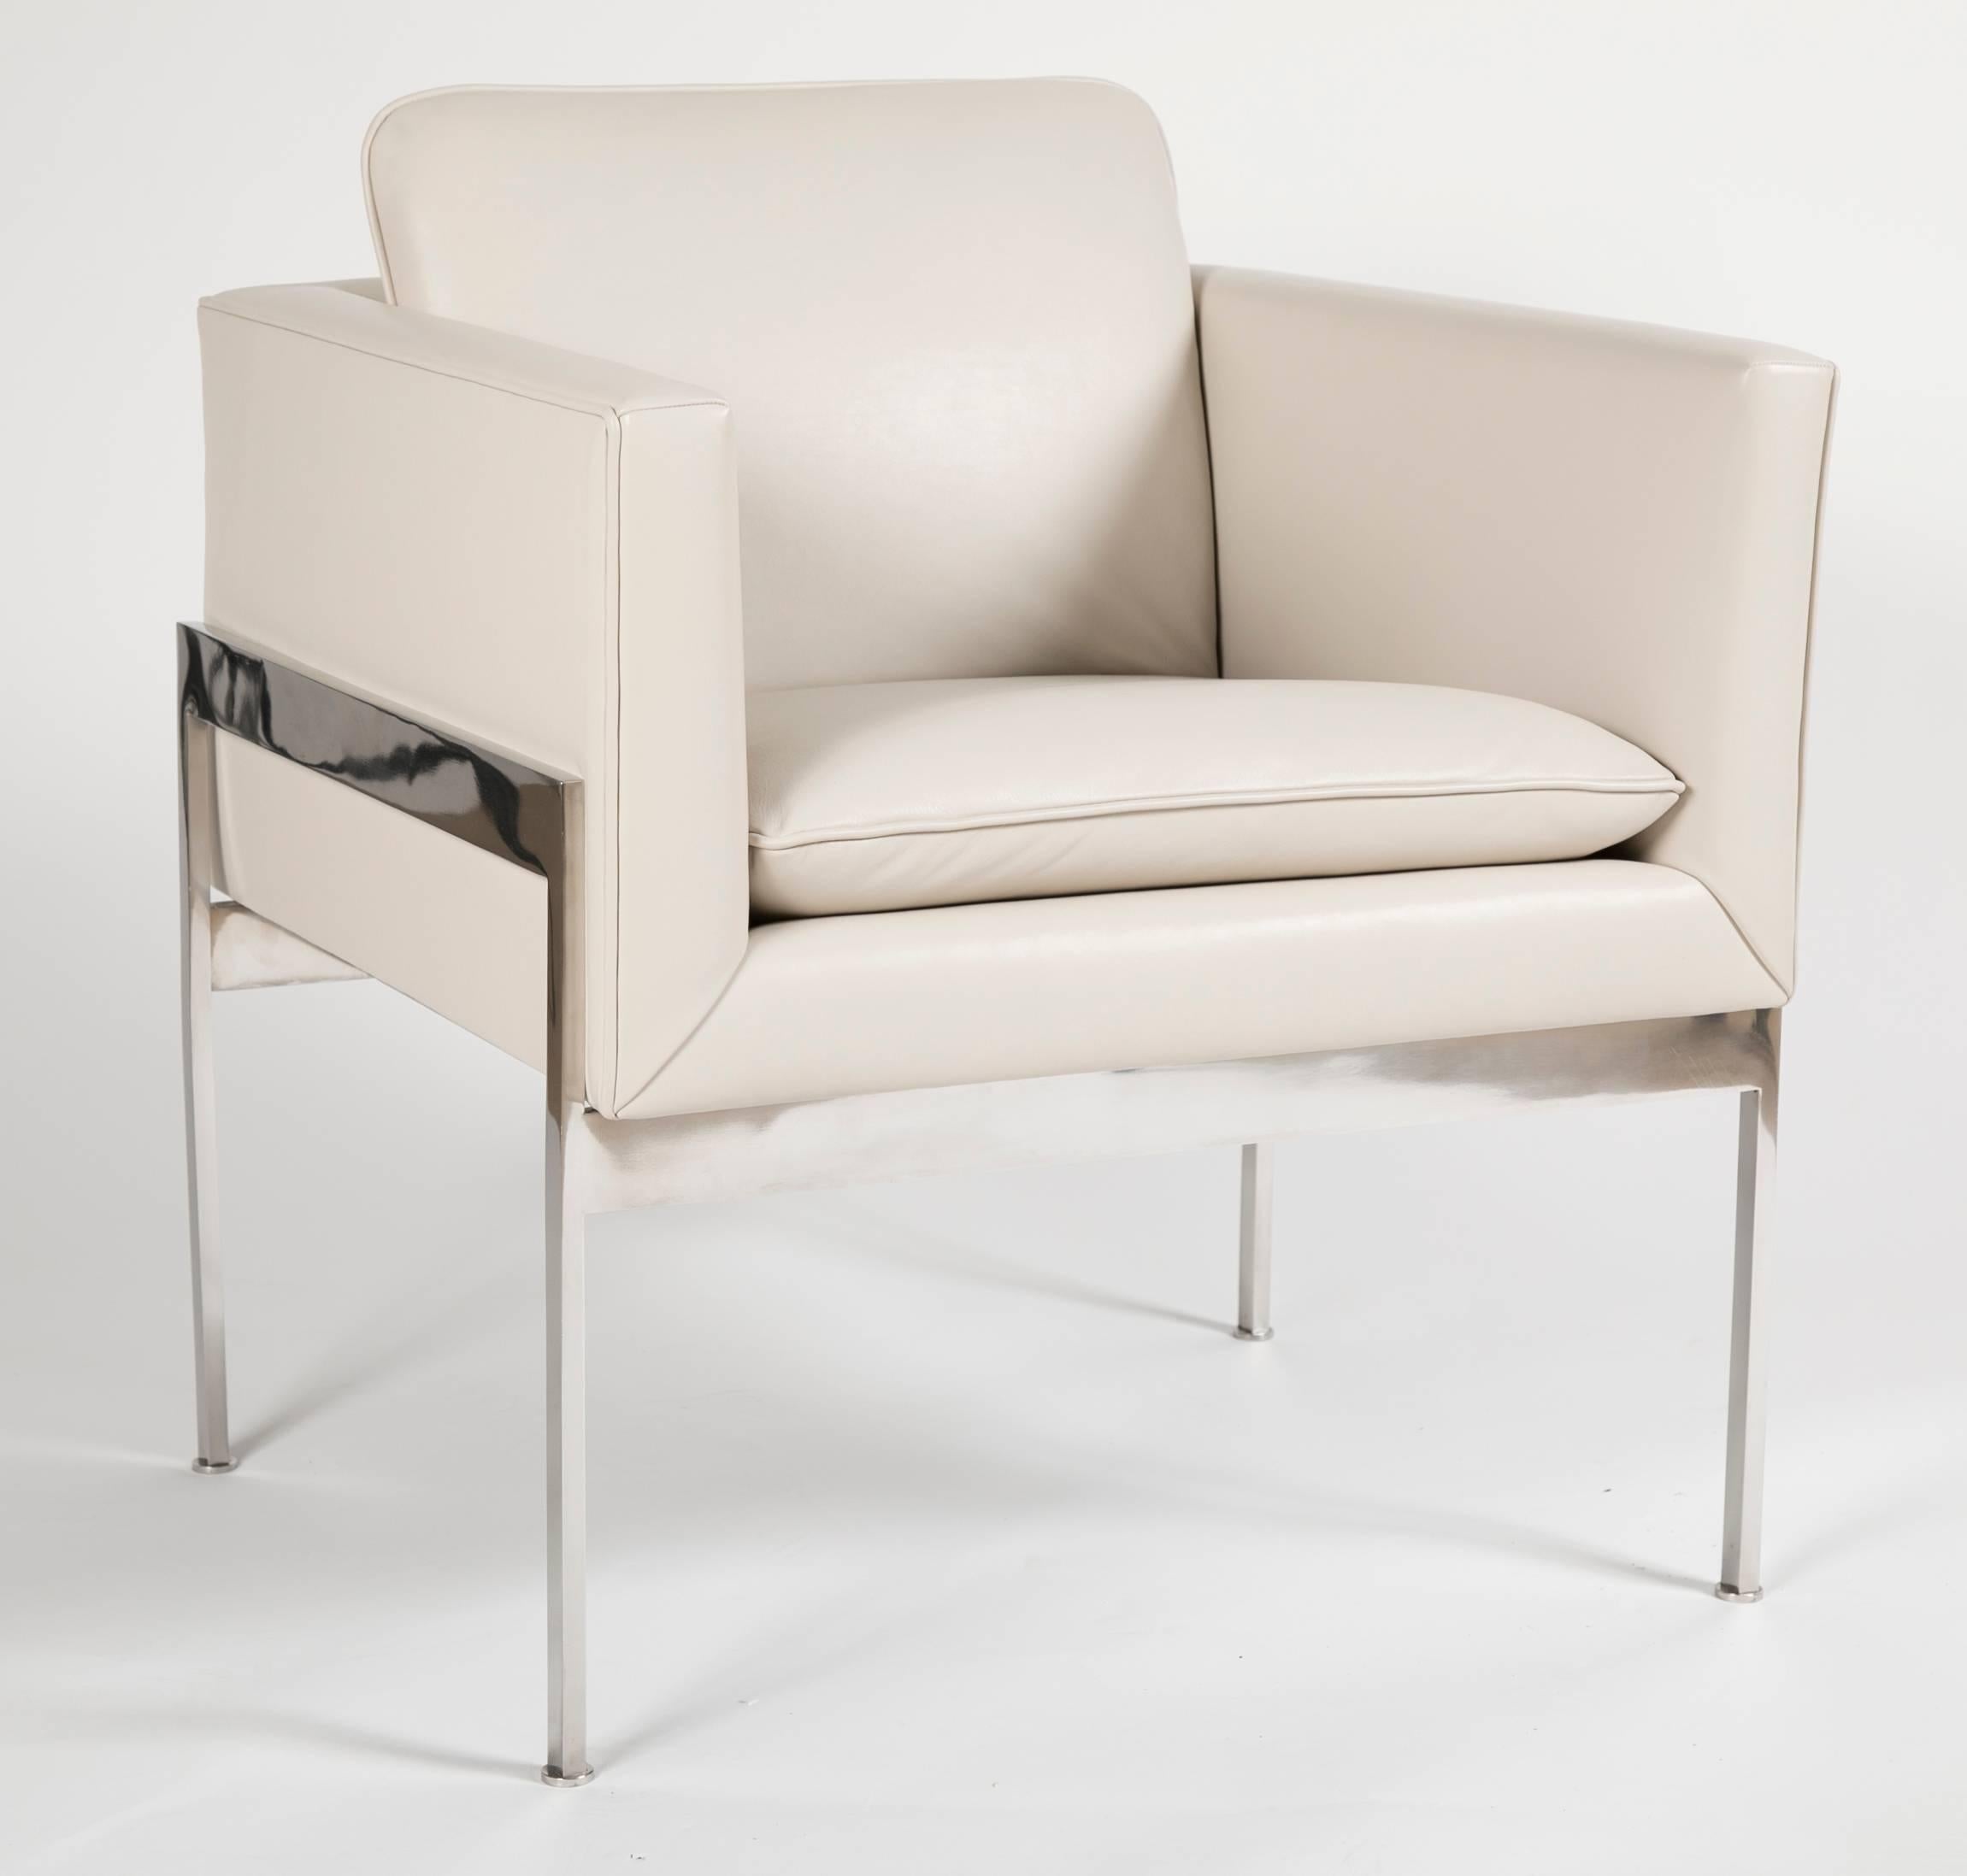 A cube chair newly covered in cream Sorensen leather. The frame is made of solid chrome-plated metal terminating on 1/4